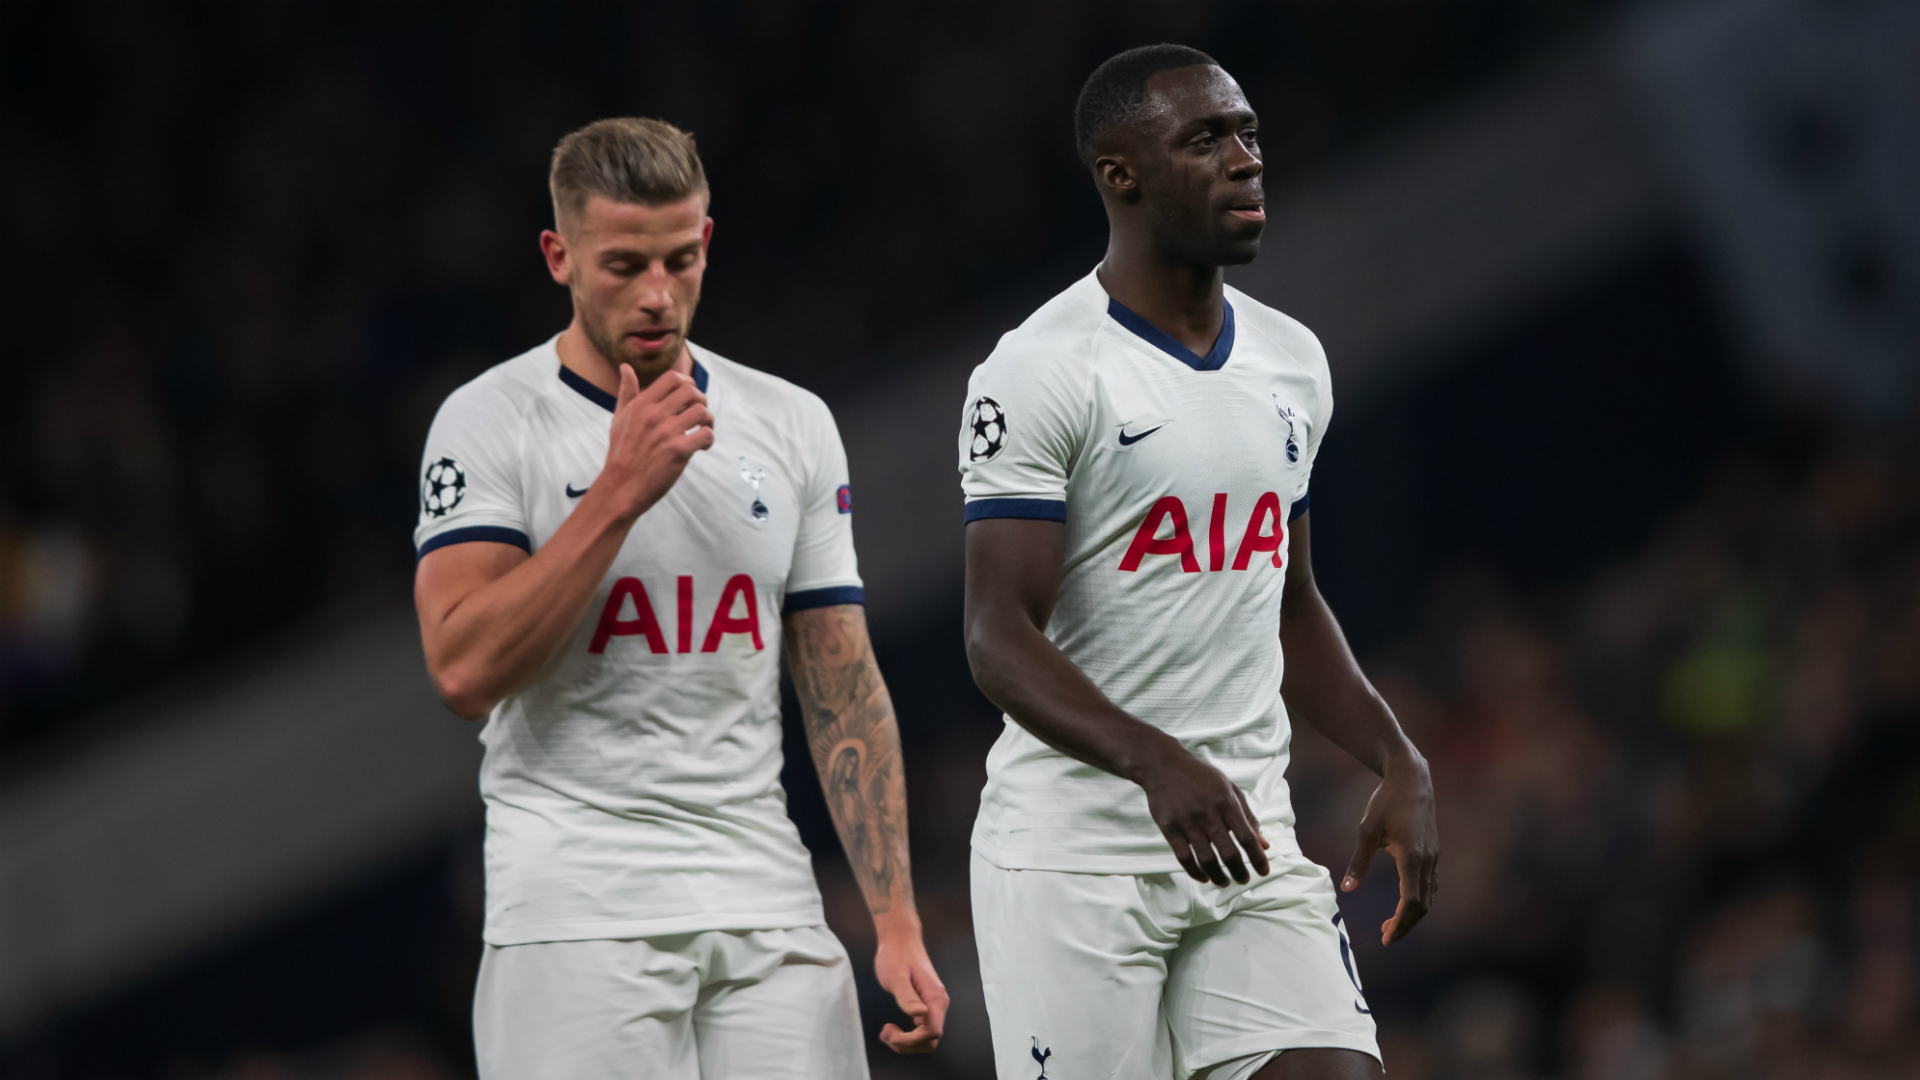 RB Leipzig may have the upper hand against Tottenham but Toby Alderweireld says all is not lost in the Champions League last-16 tie.